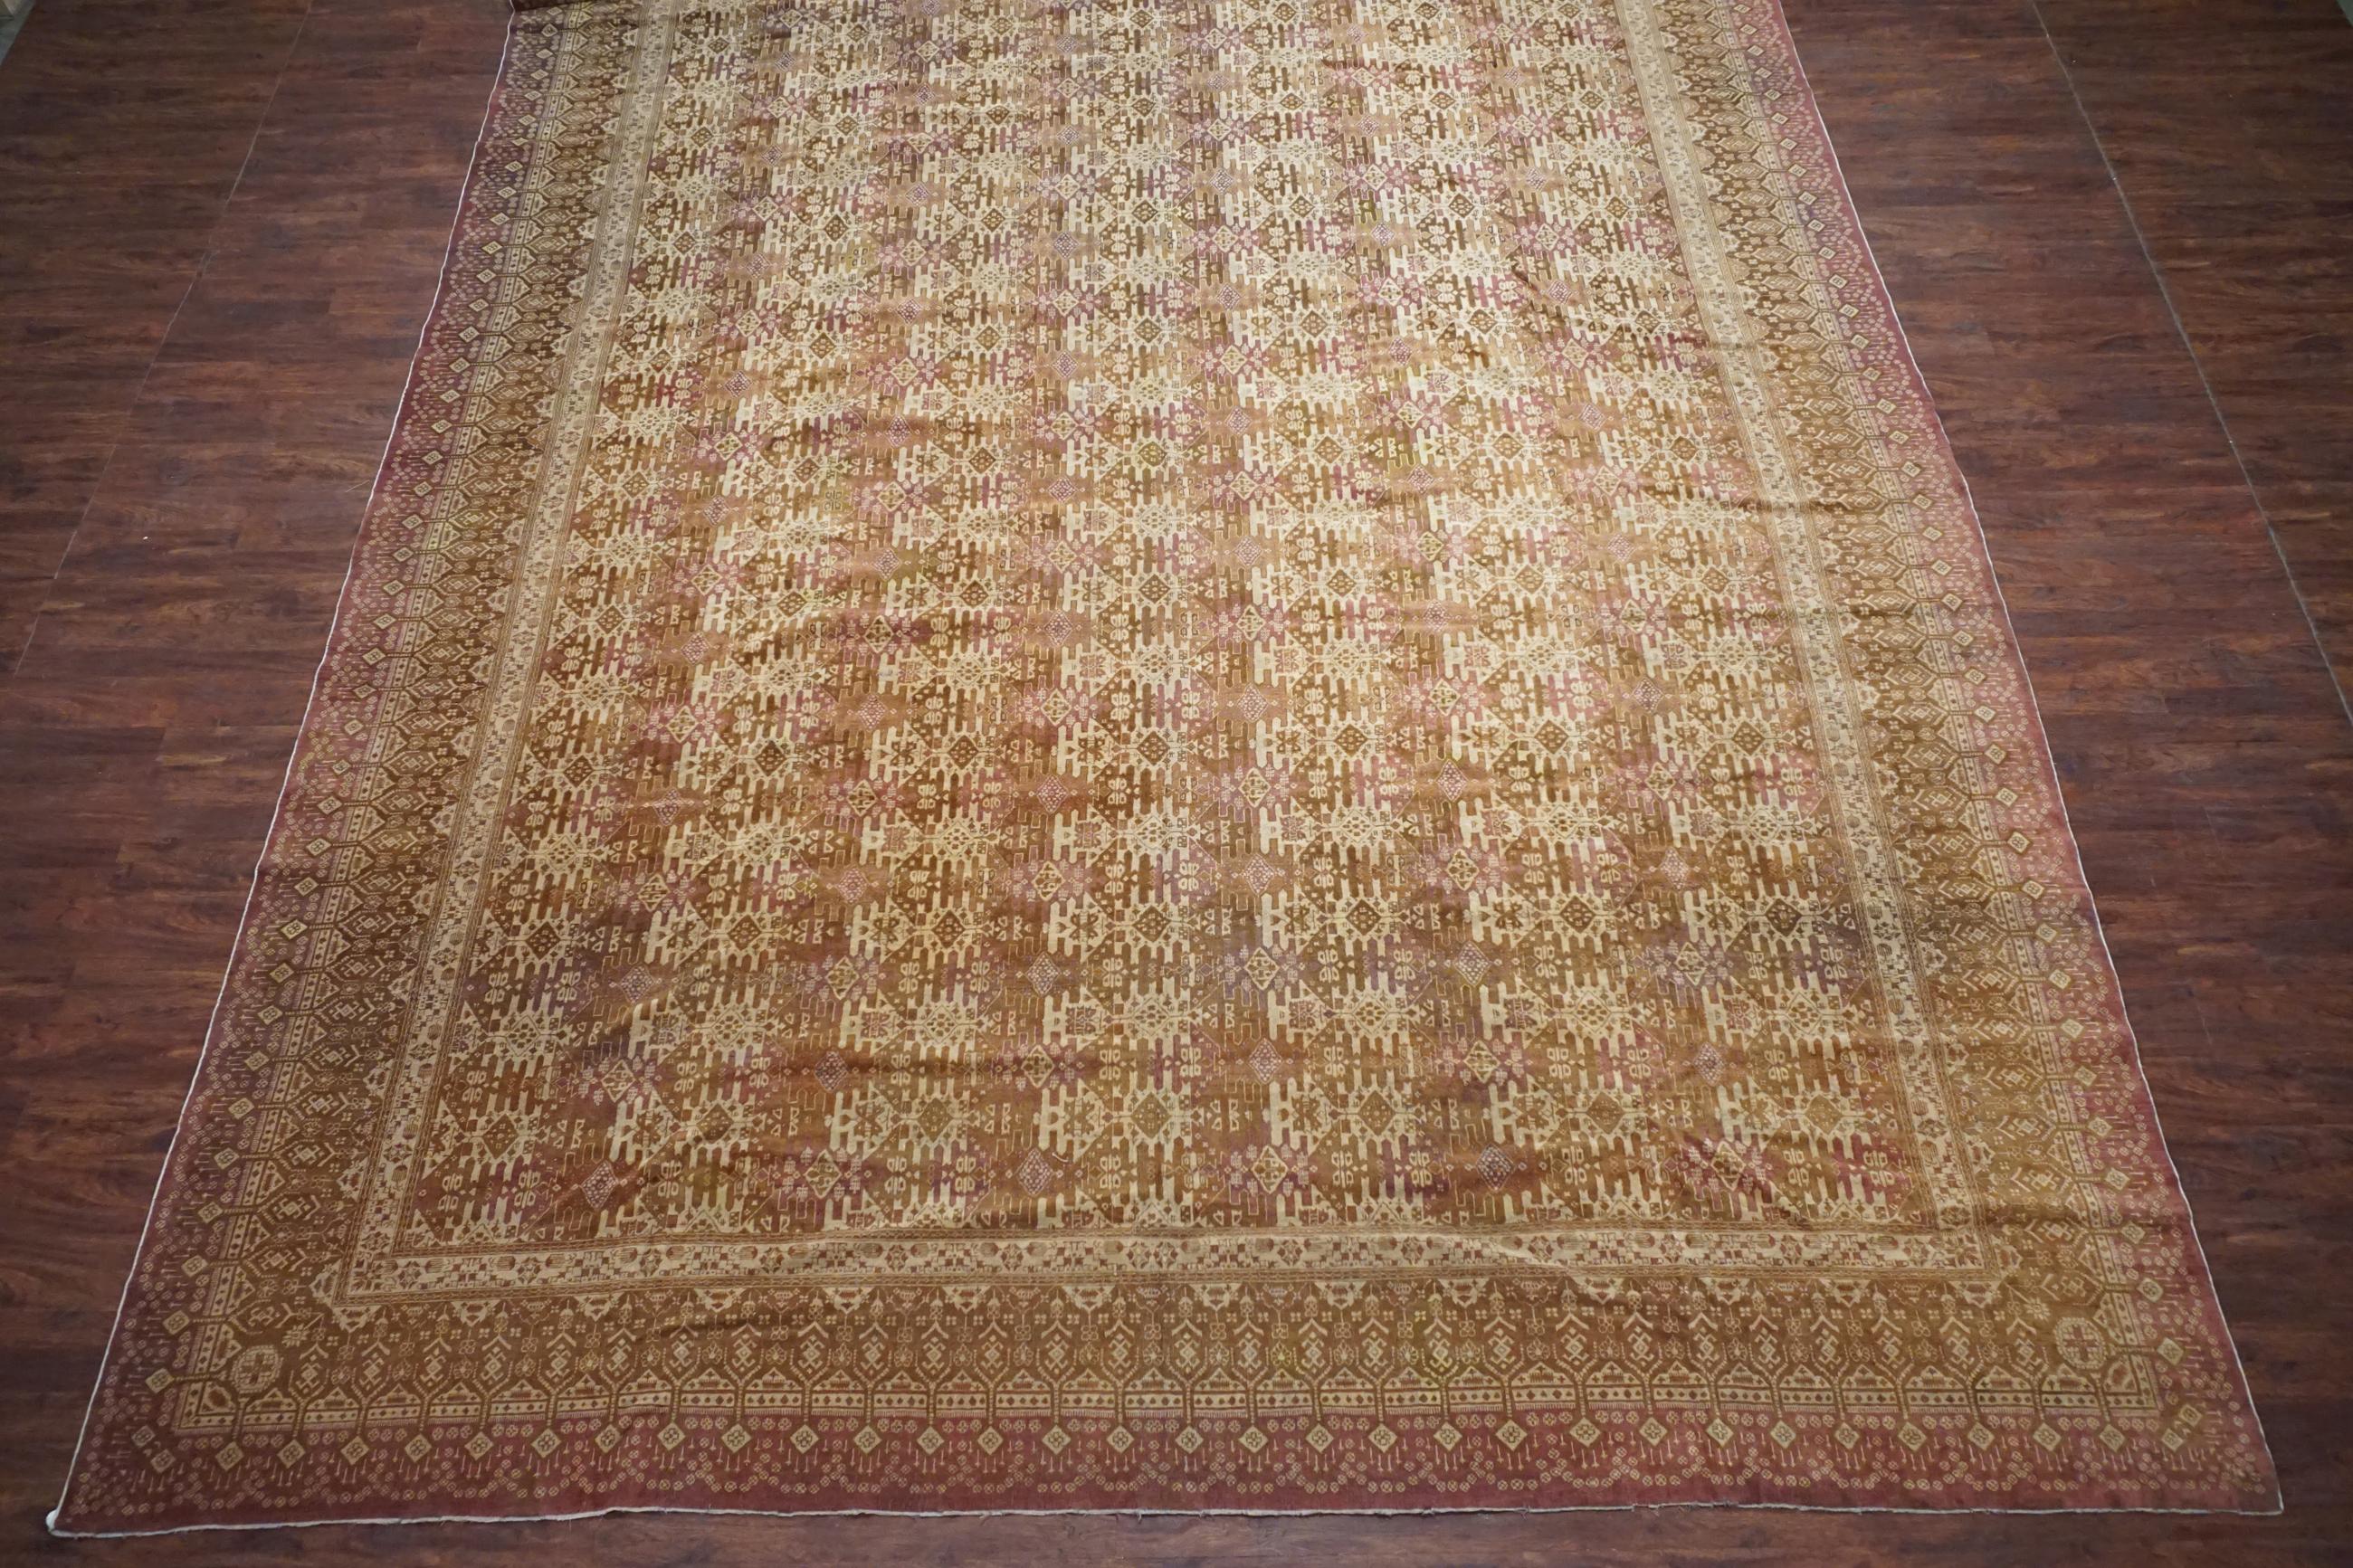 Hand-knotted wool pile on a cotton foundation.

Circa 1890

Dimensions: 13' x 18'8